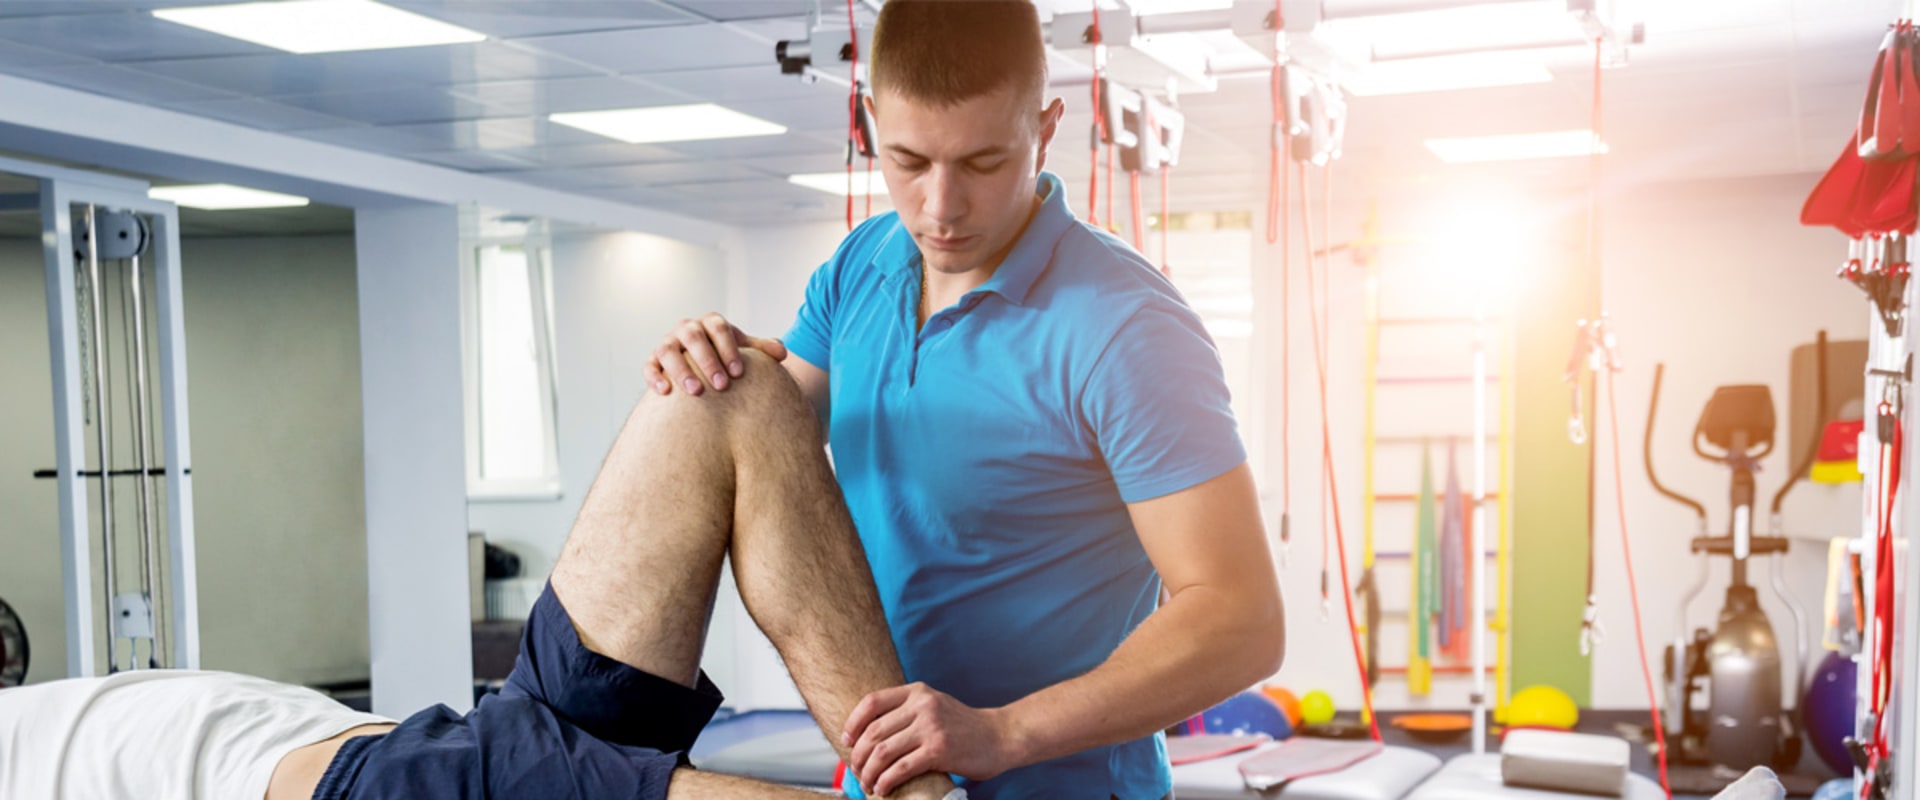 Can Physical Therapy Make Injuries Worse?